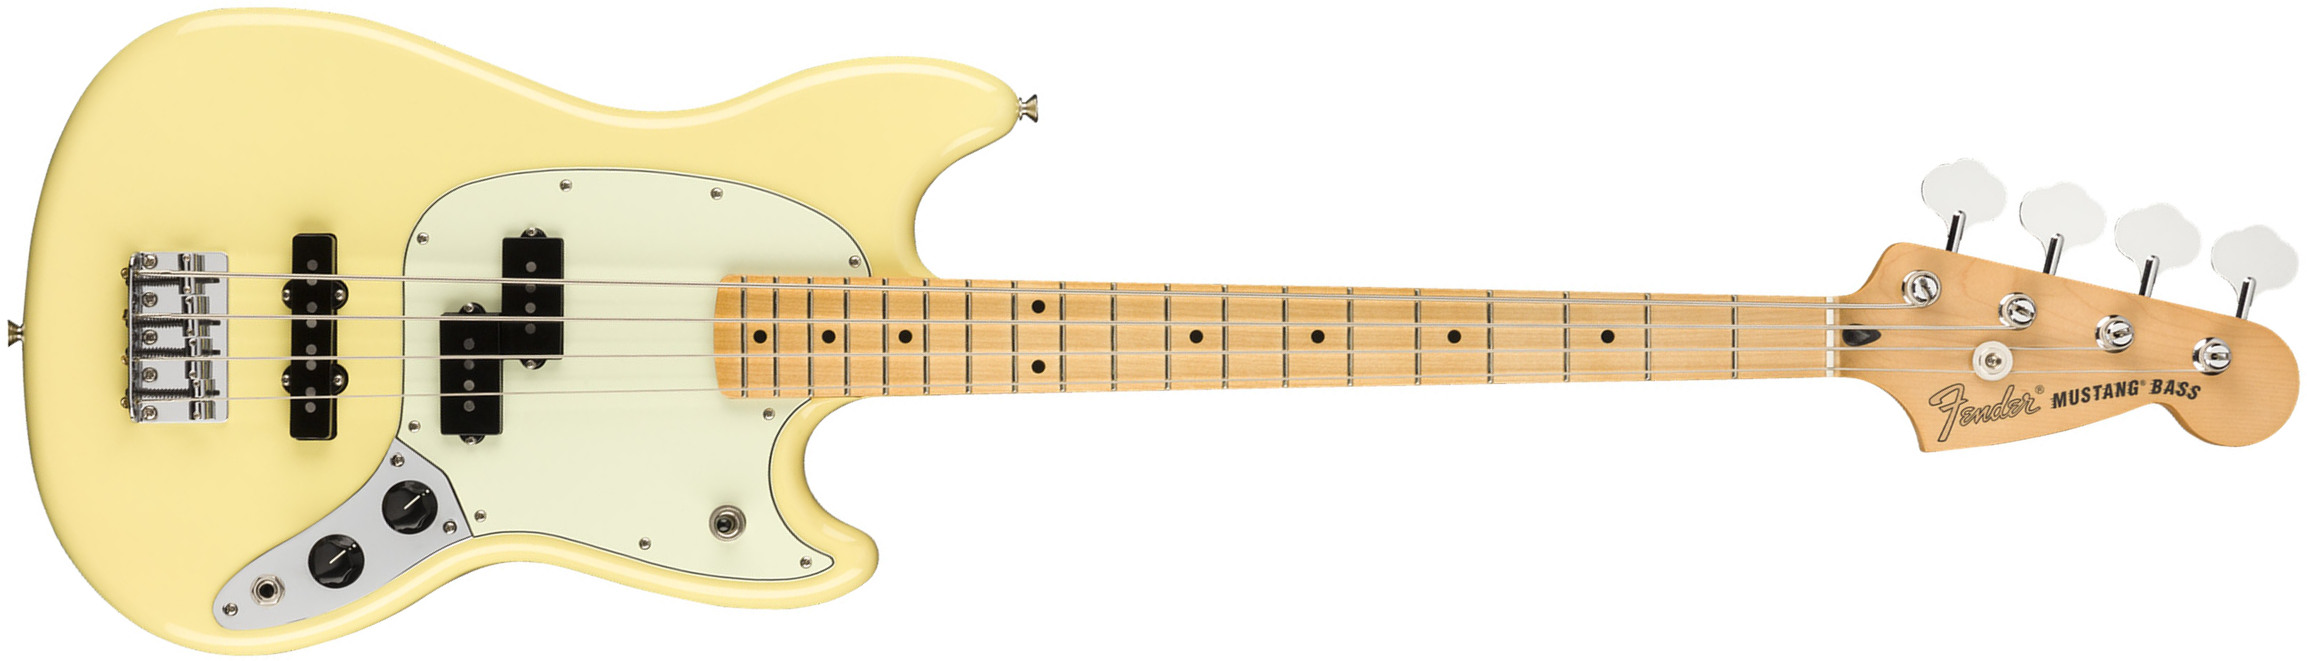 Fender Player Mustang Bass Pj Ltd Mex Mn - Canary - Solid body elektrische bas - Main picture